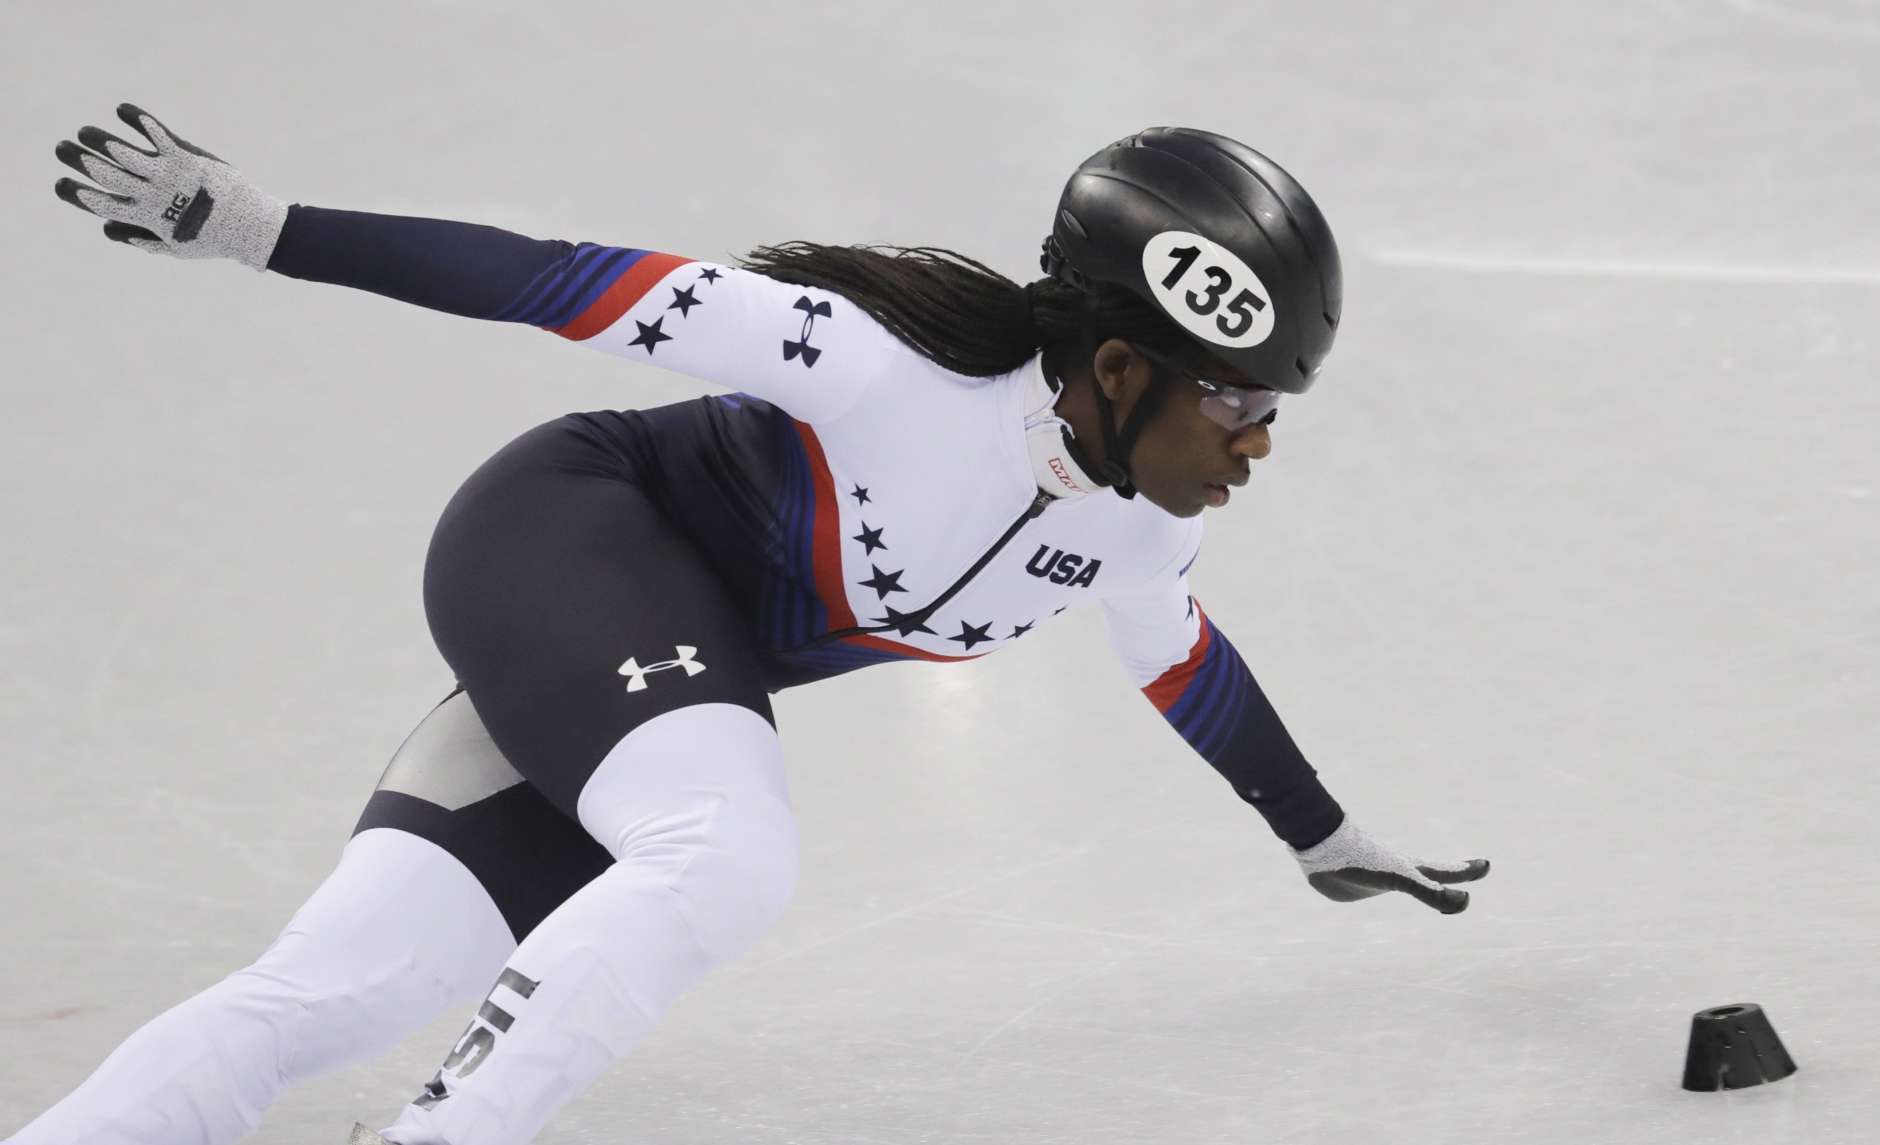 Maame Biney of the United States in action during the ladies' 500 meters short-track speedskating in the Gangneung Ice Arena at the 2018 Winter Olympics in Gangneung, South Korea, Saturday, Feb. 10, 2018. (AP Photo/Bernat Armangue)